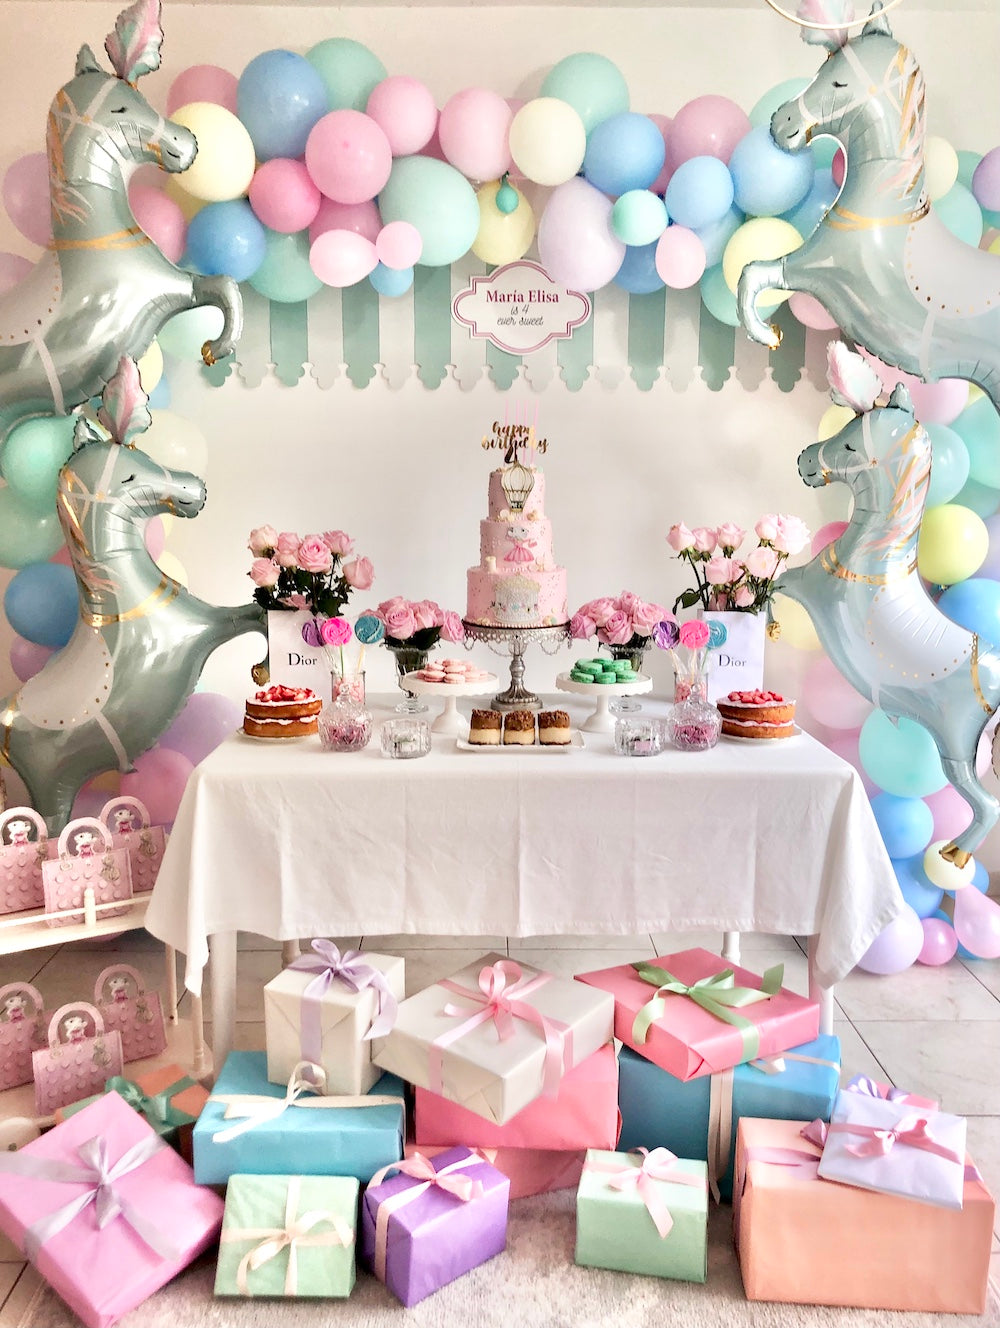 Claris the Mouse and Charlotte sy Dimby party inspiration